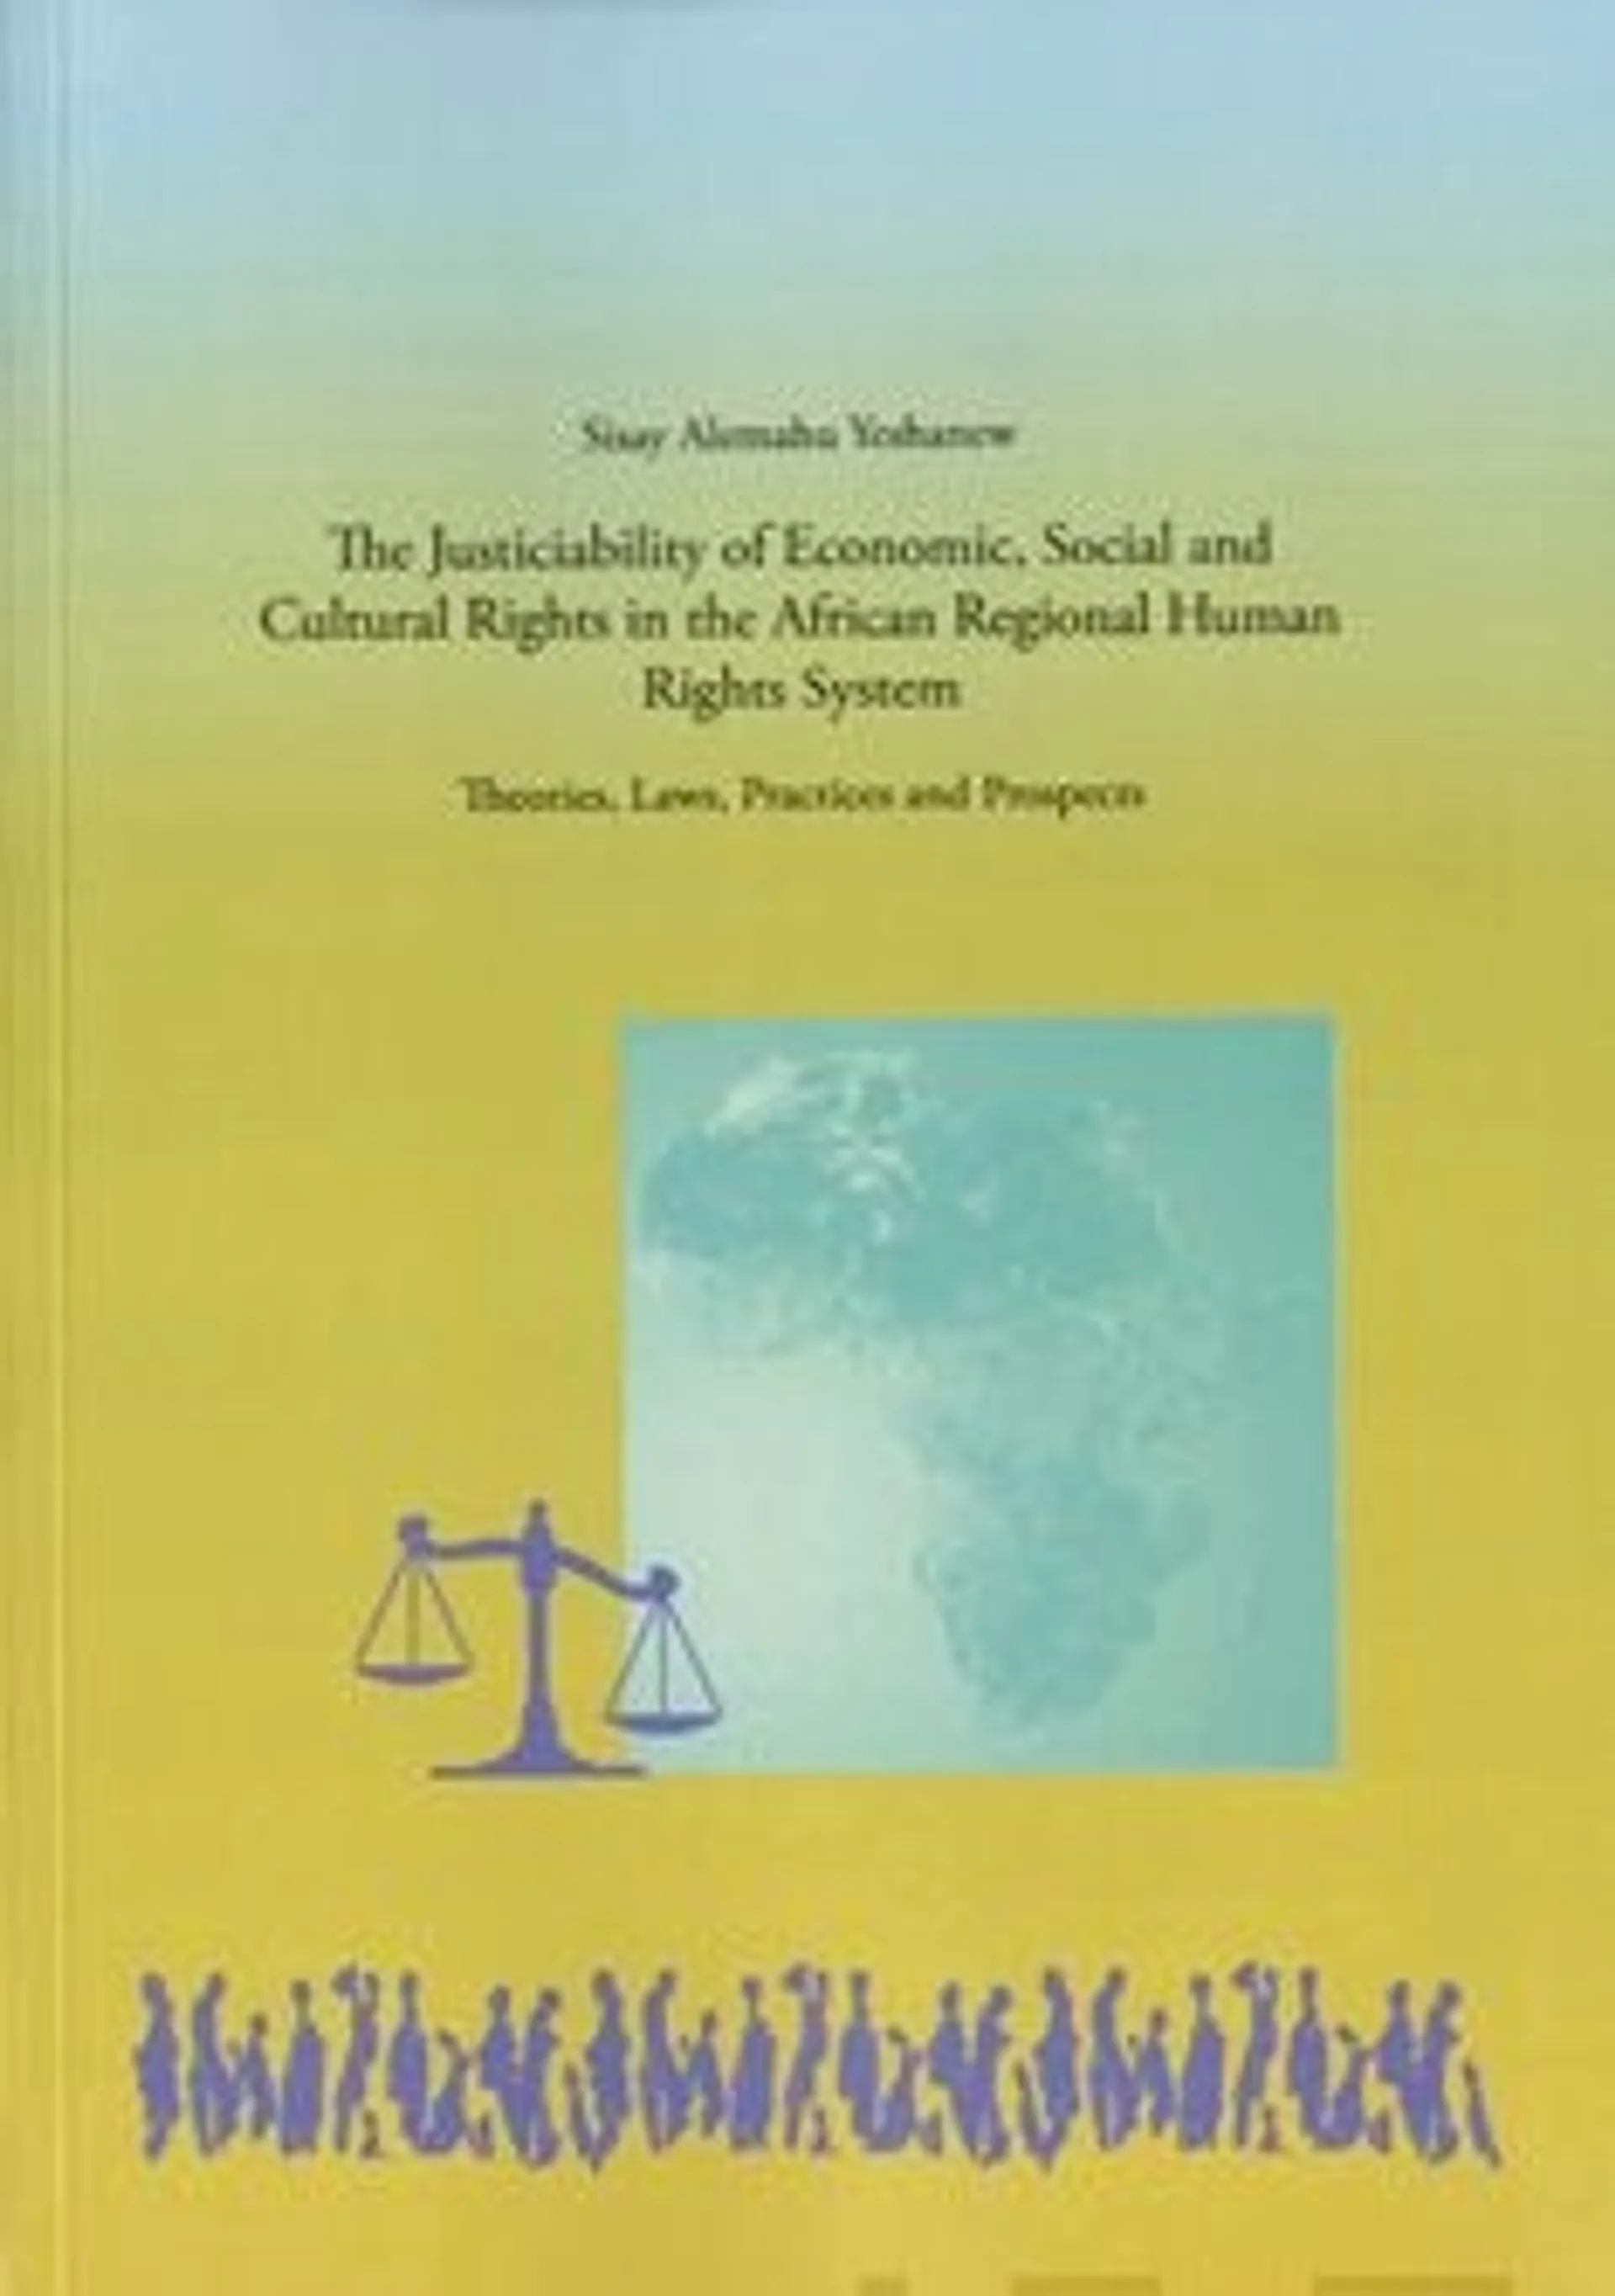 Yeshanew, The Justiciability of Economic, Social and Cultural Rights in the AfricanRegional Human Rights System